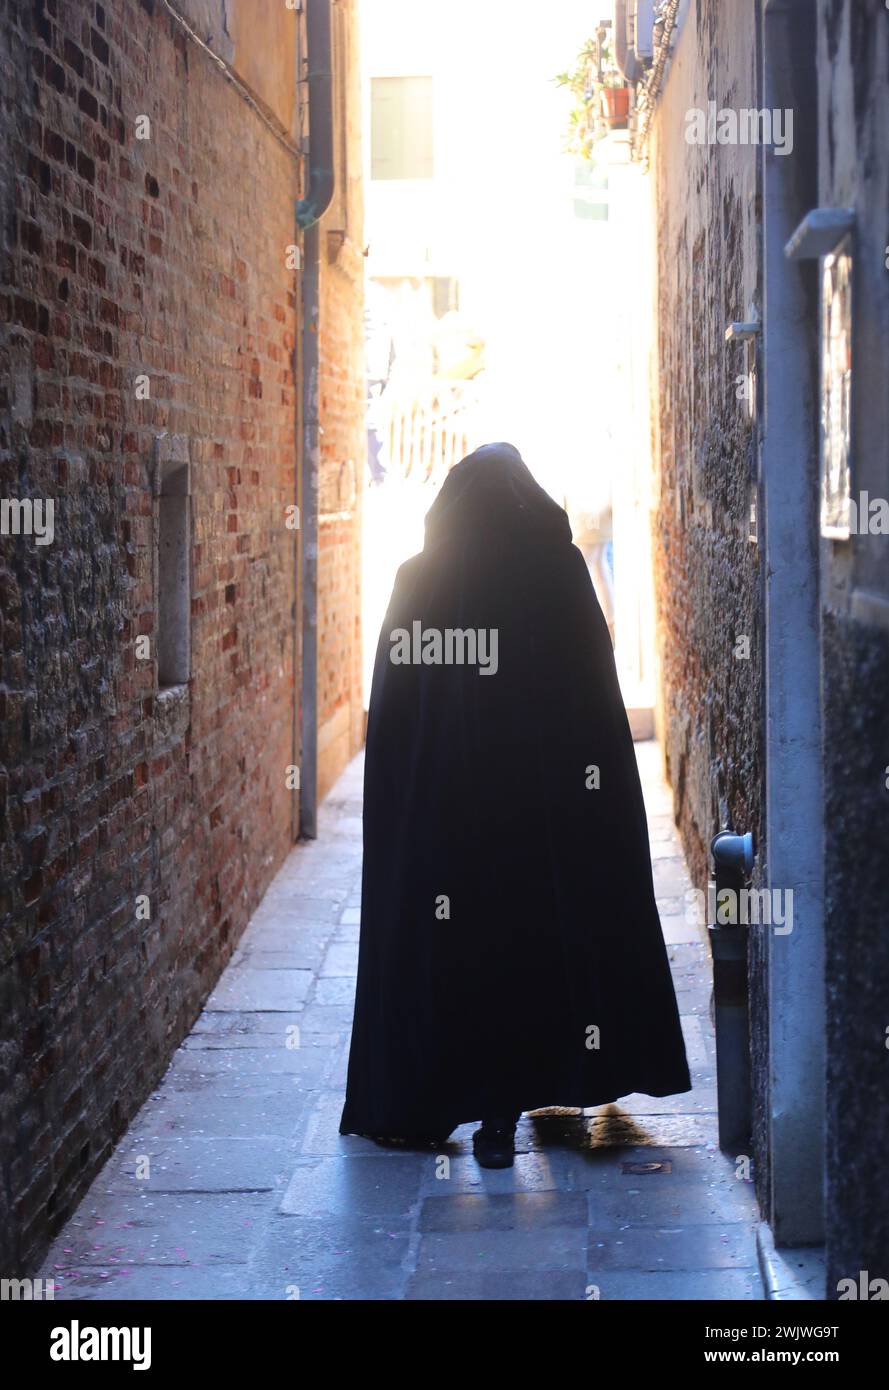 anonymous hooded stroller with black cloak dress walking through the narrow alleys of Venice Stock Photo